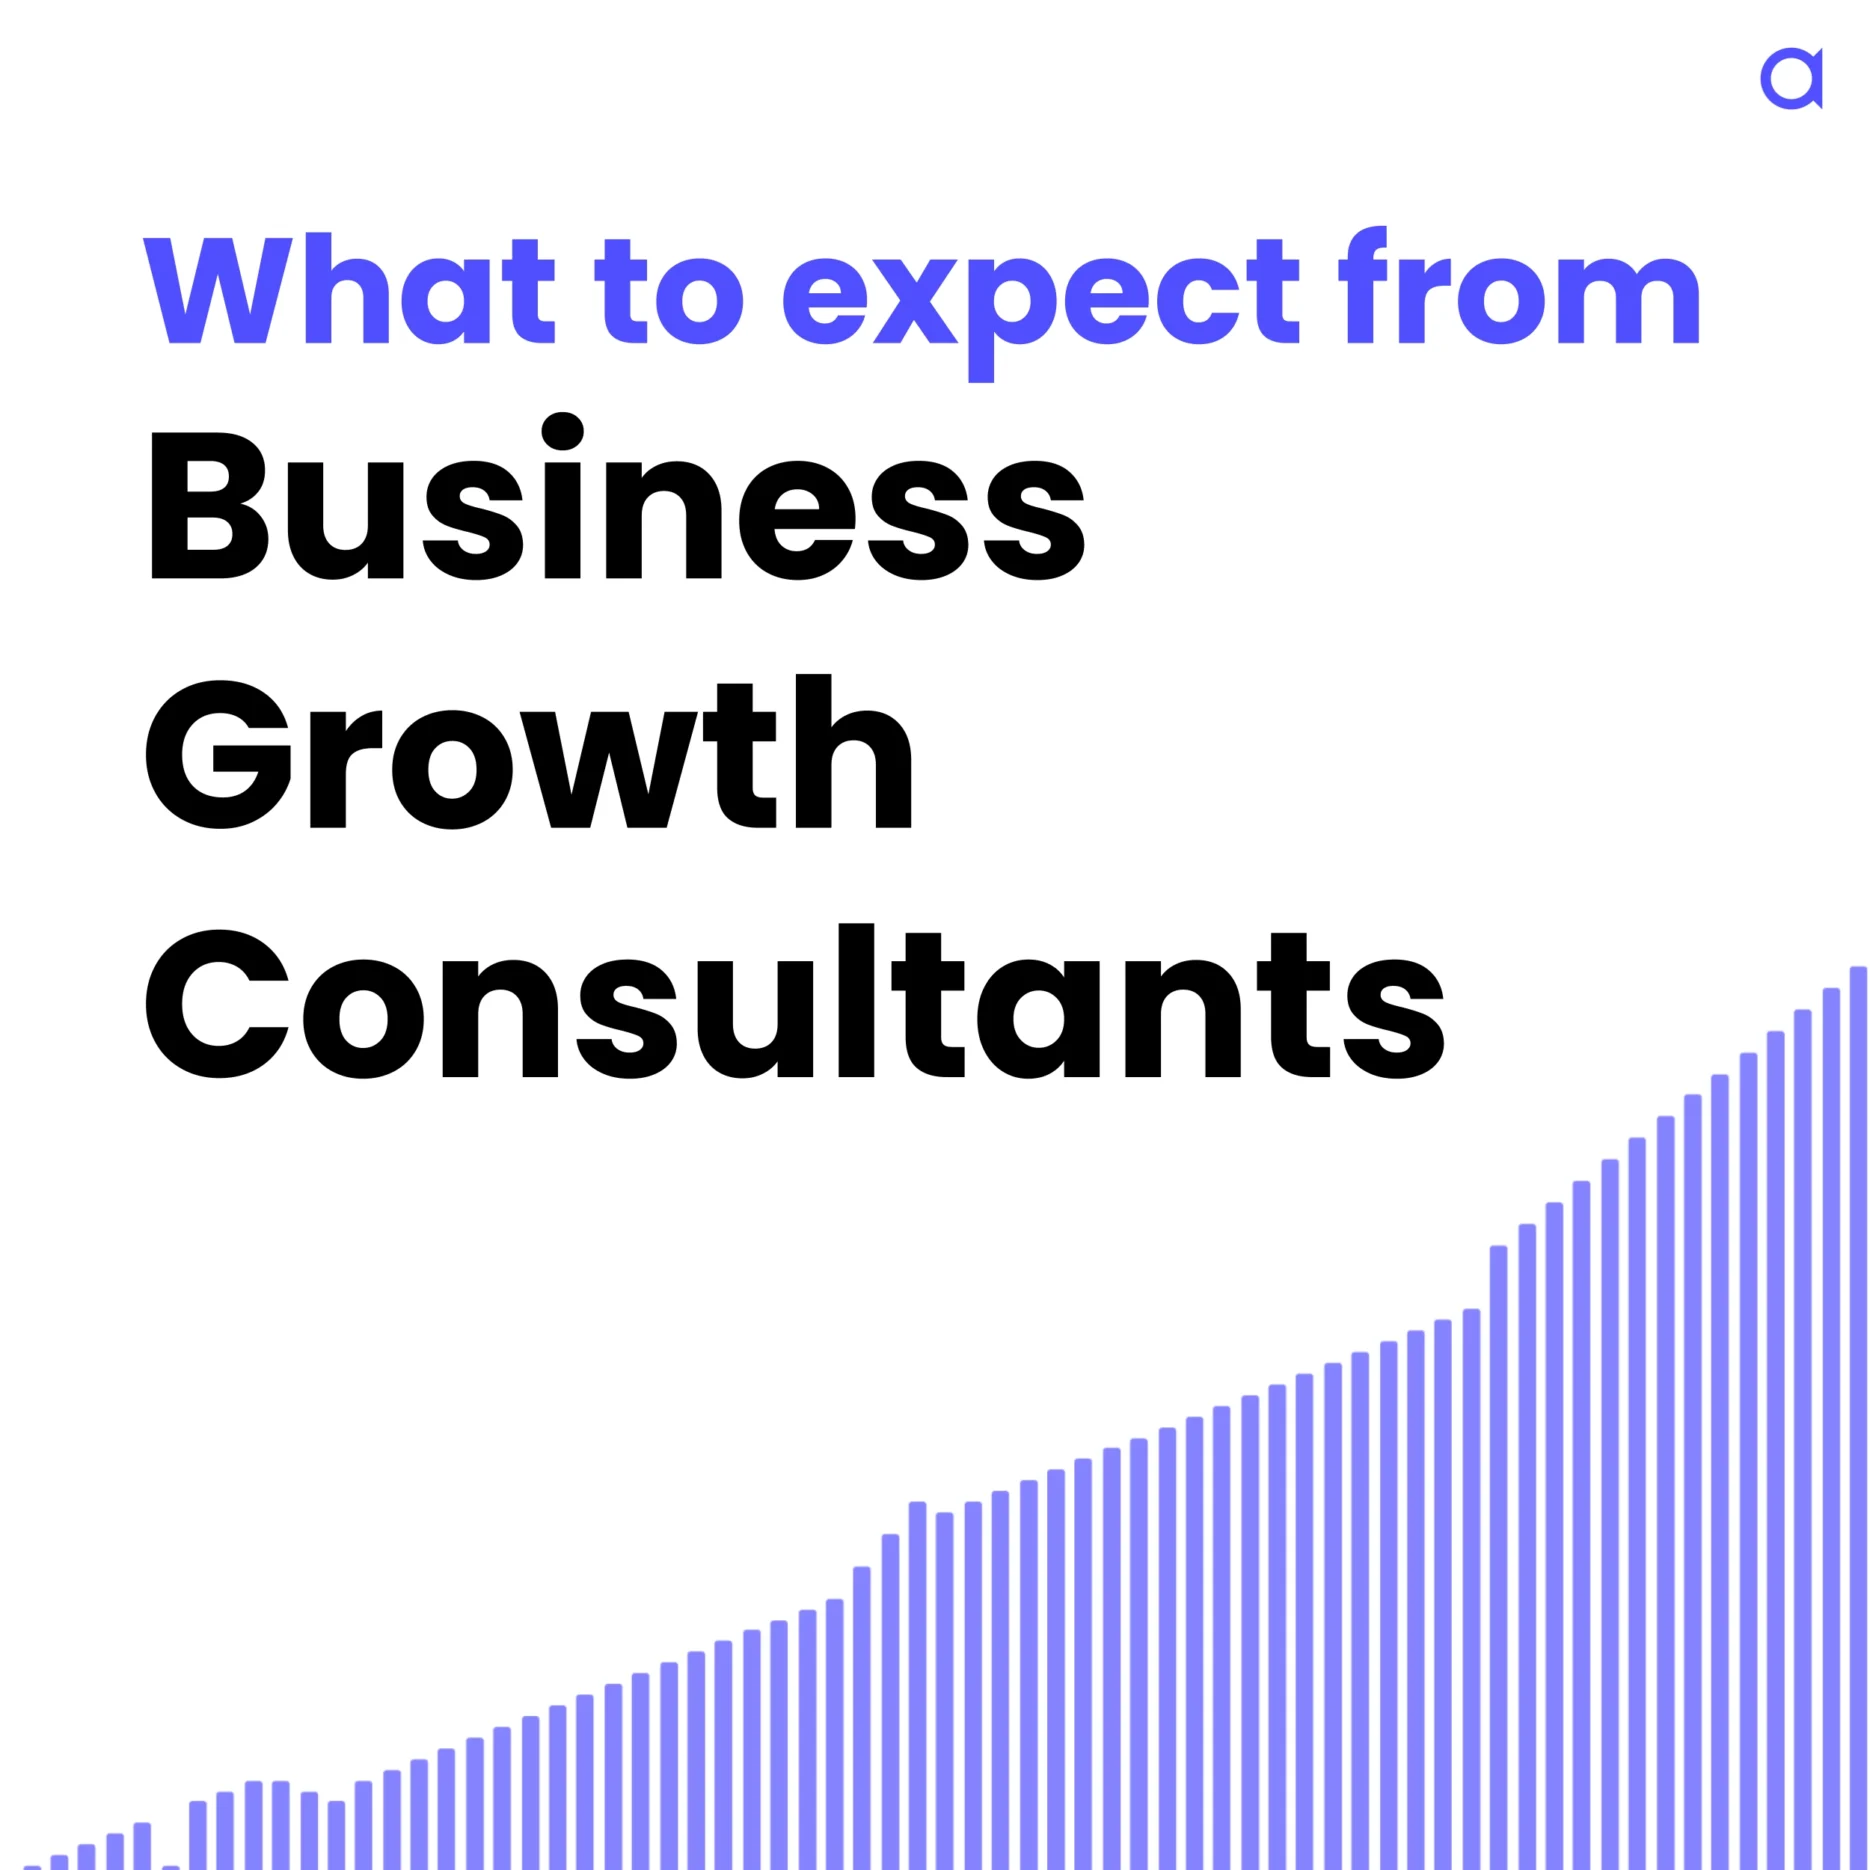 Business Growth Consultant